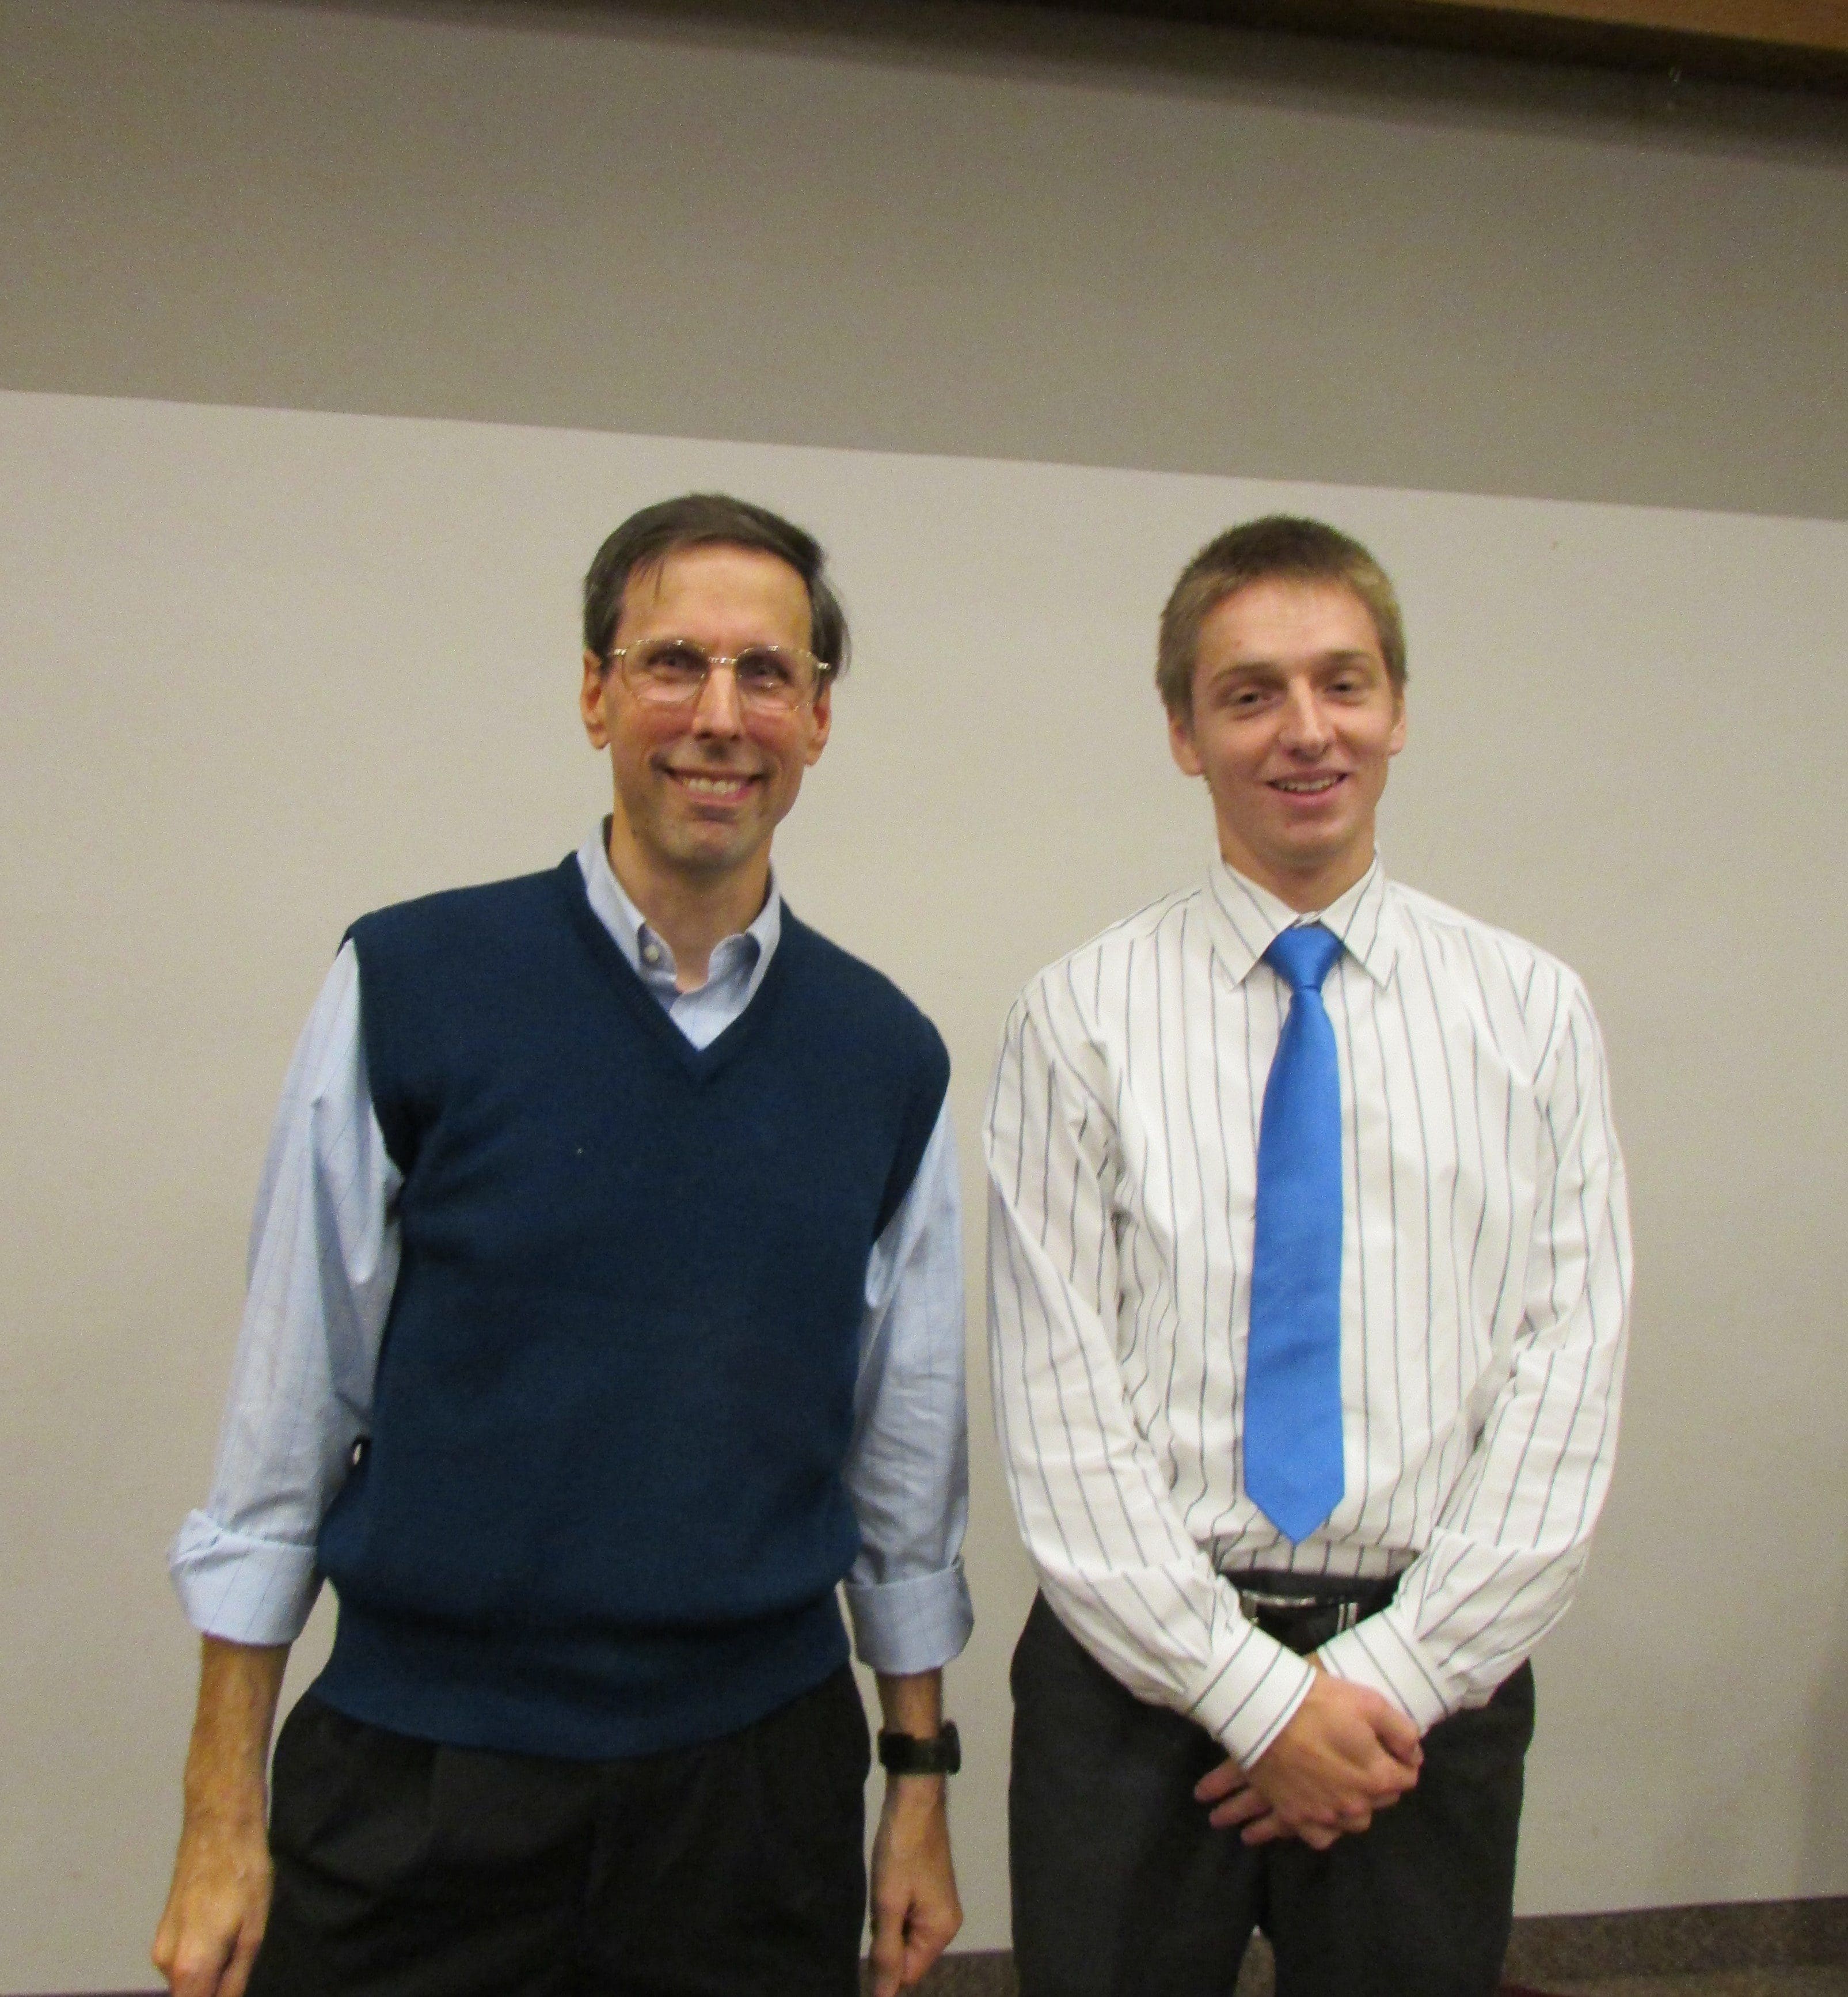 Matt Koerner ’19 and Professor of History and Department Chair John Fry, Ph.D., presented at the conference, which was held from Oct. 3-Oct. 6.